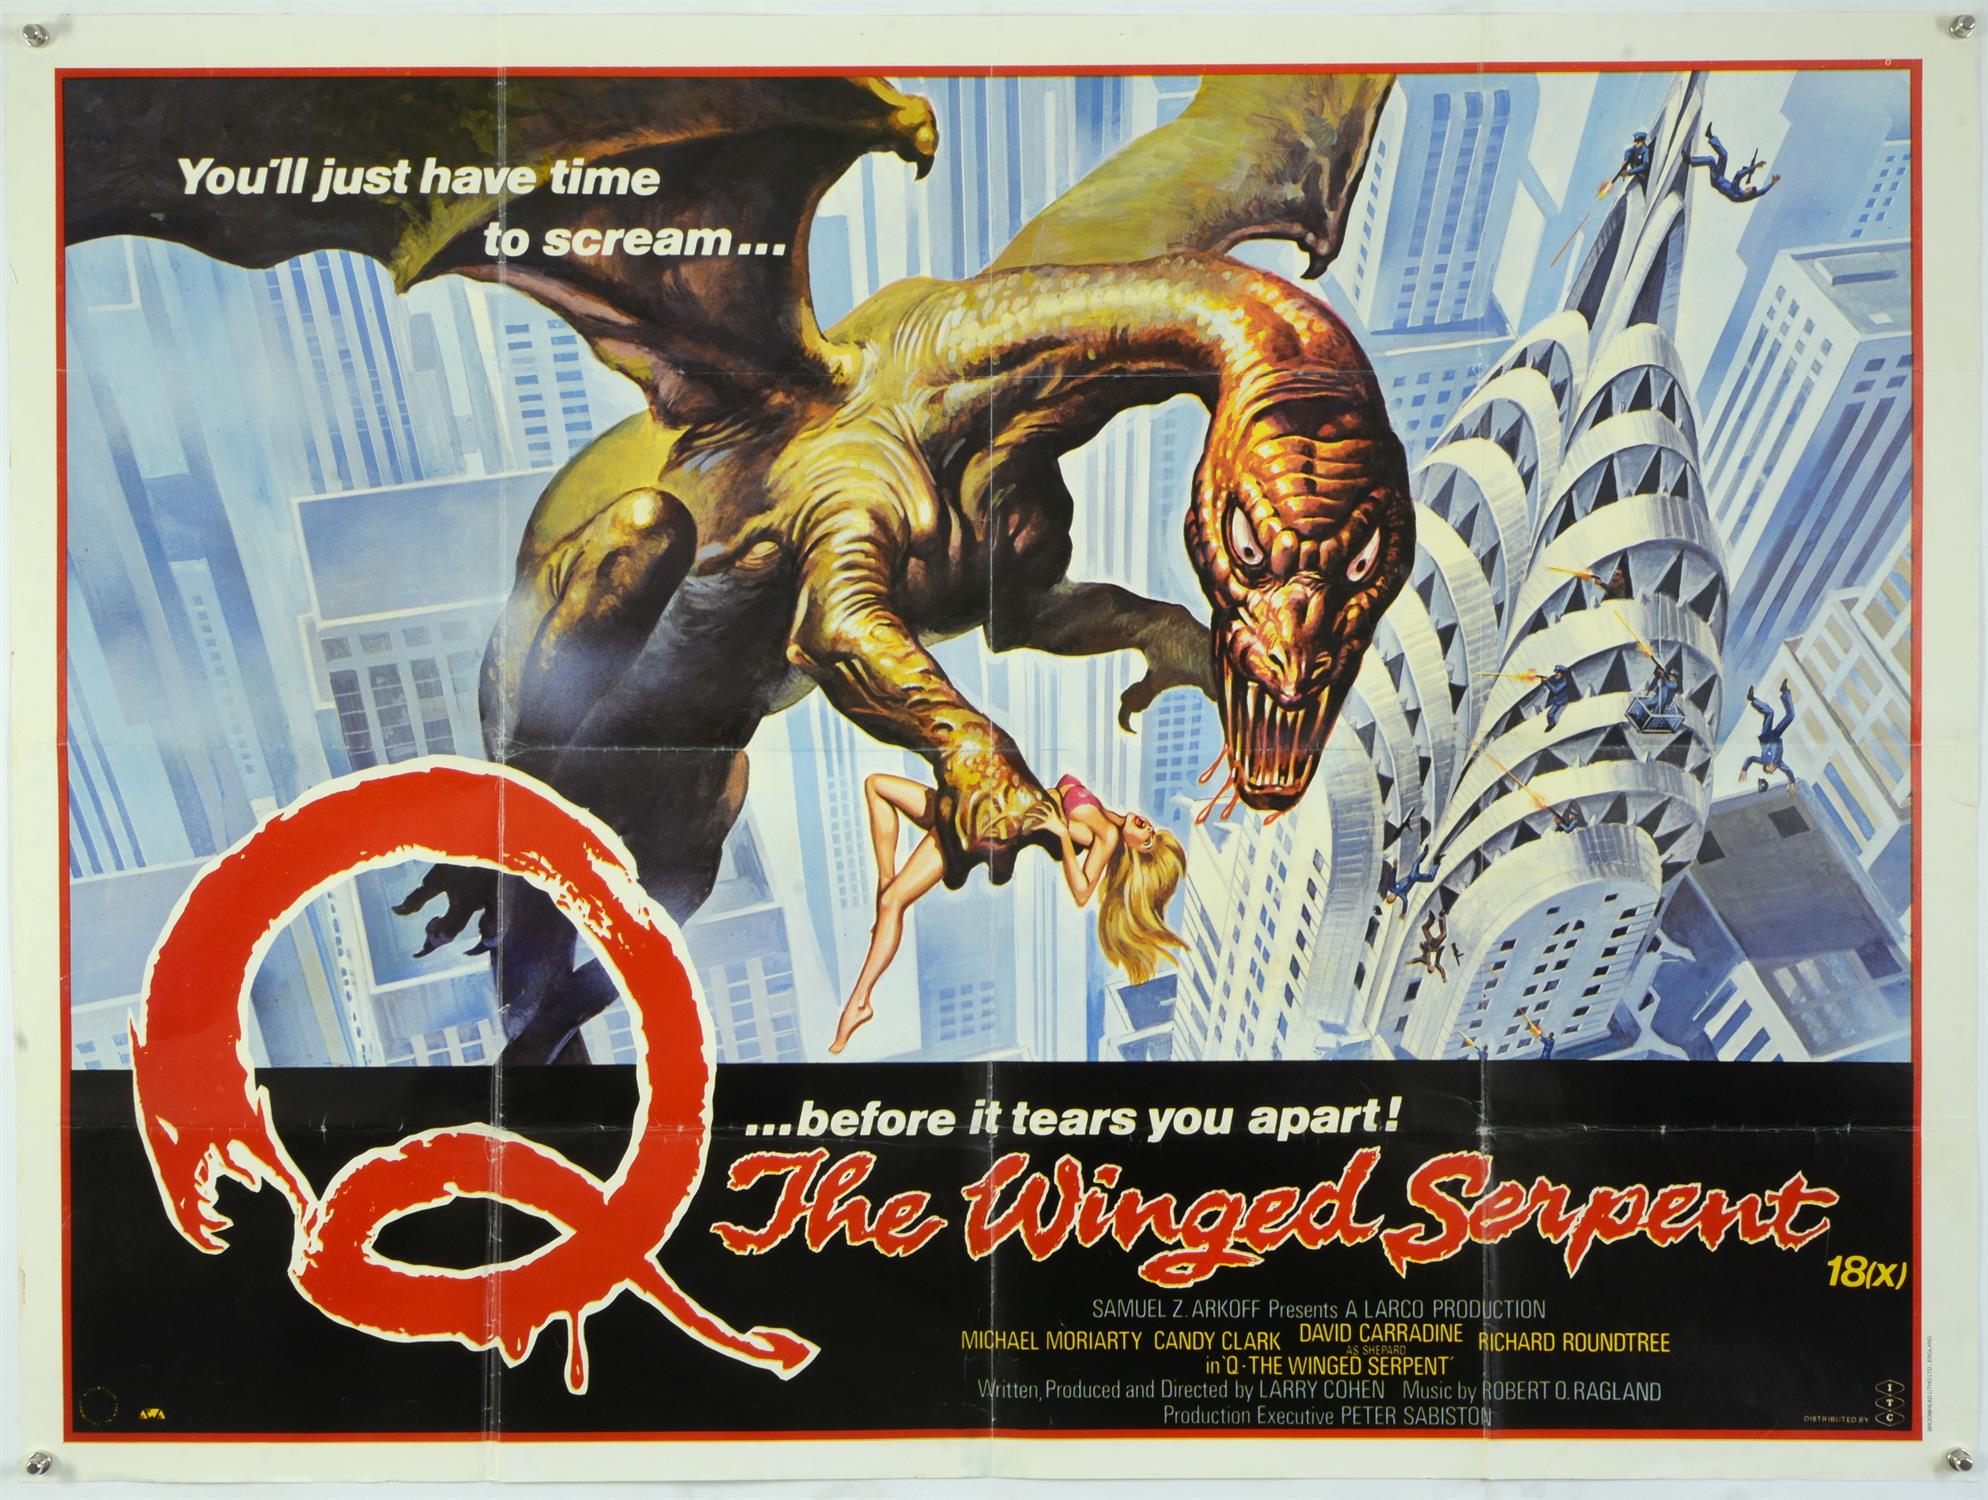 10 Horror British Quad film posters including Q The Winged Serpent, The Return of the Living Dead